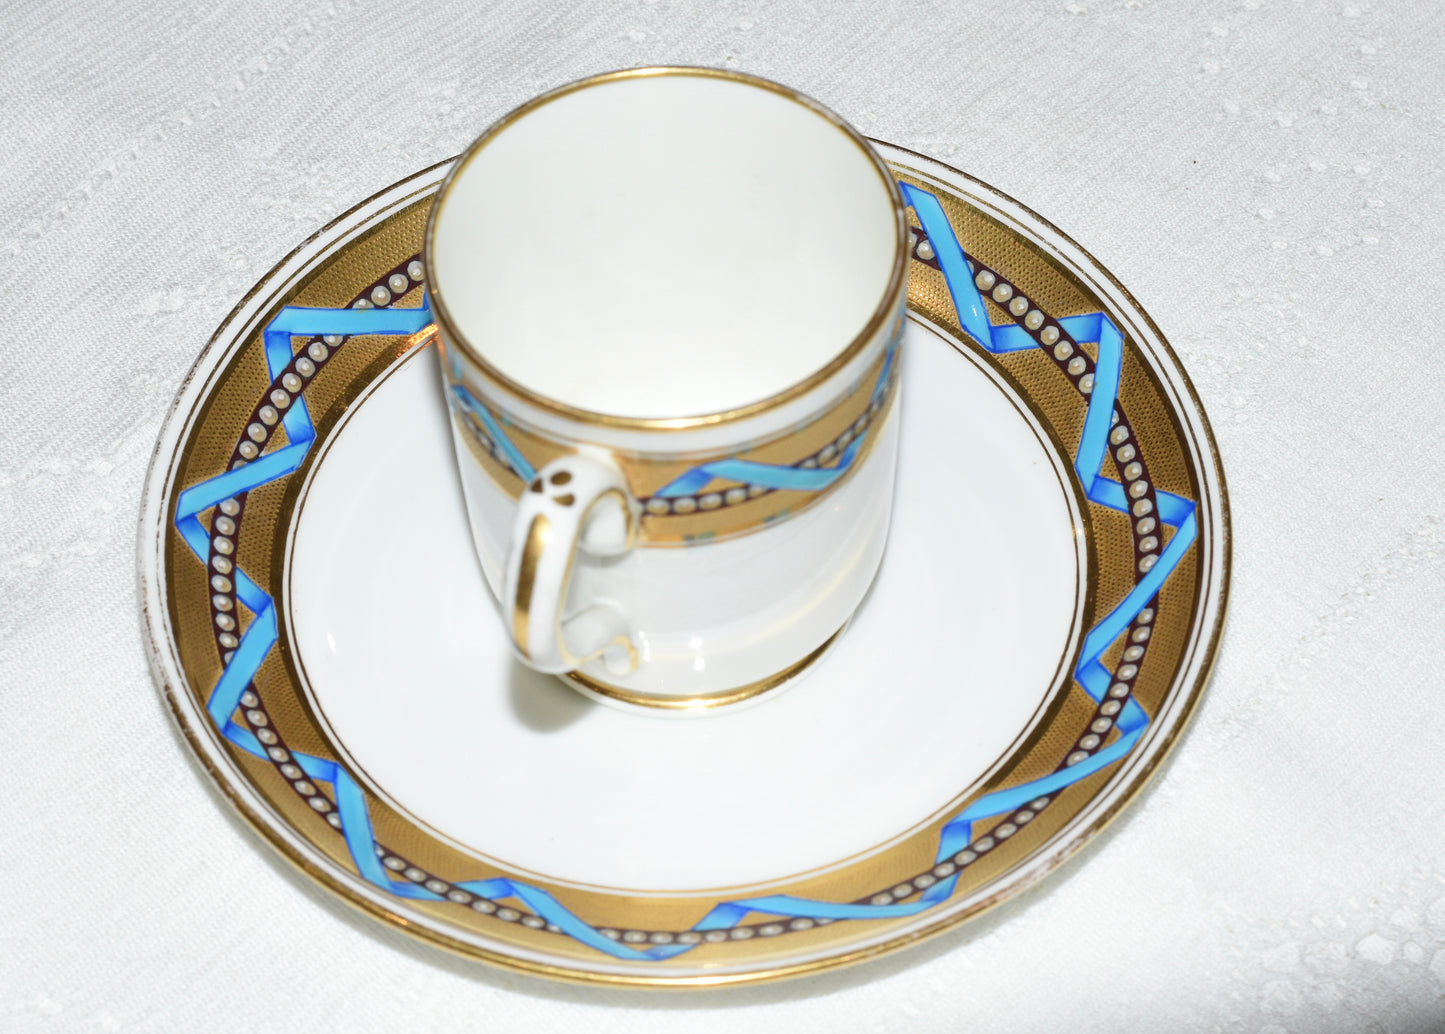 Antique Coffee Can & Saucer Set